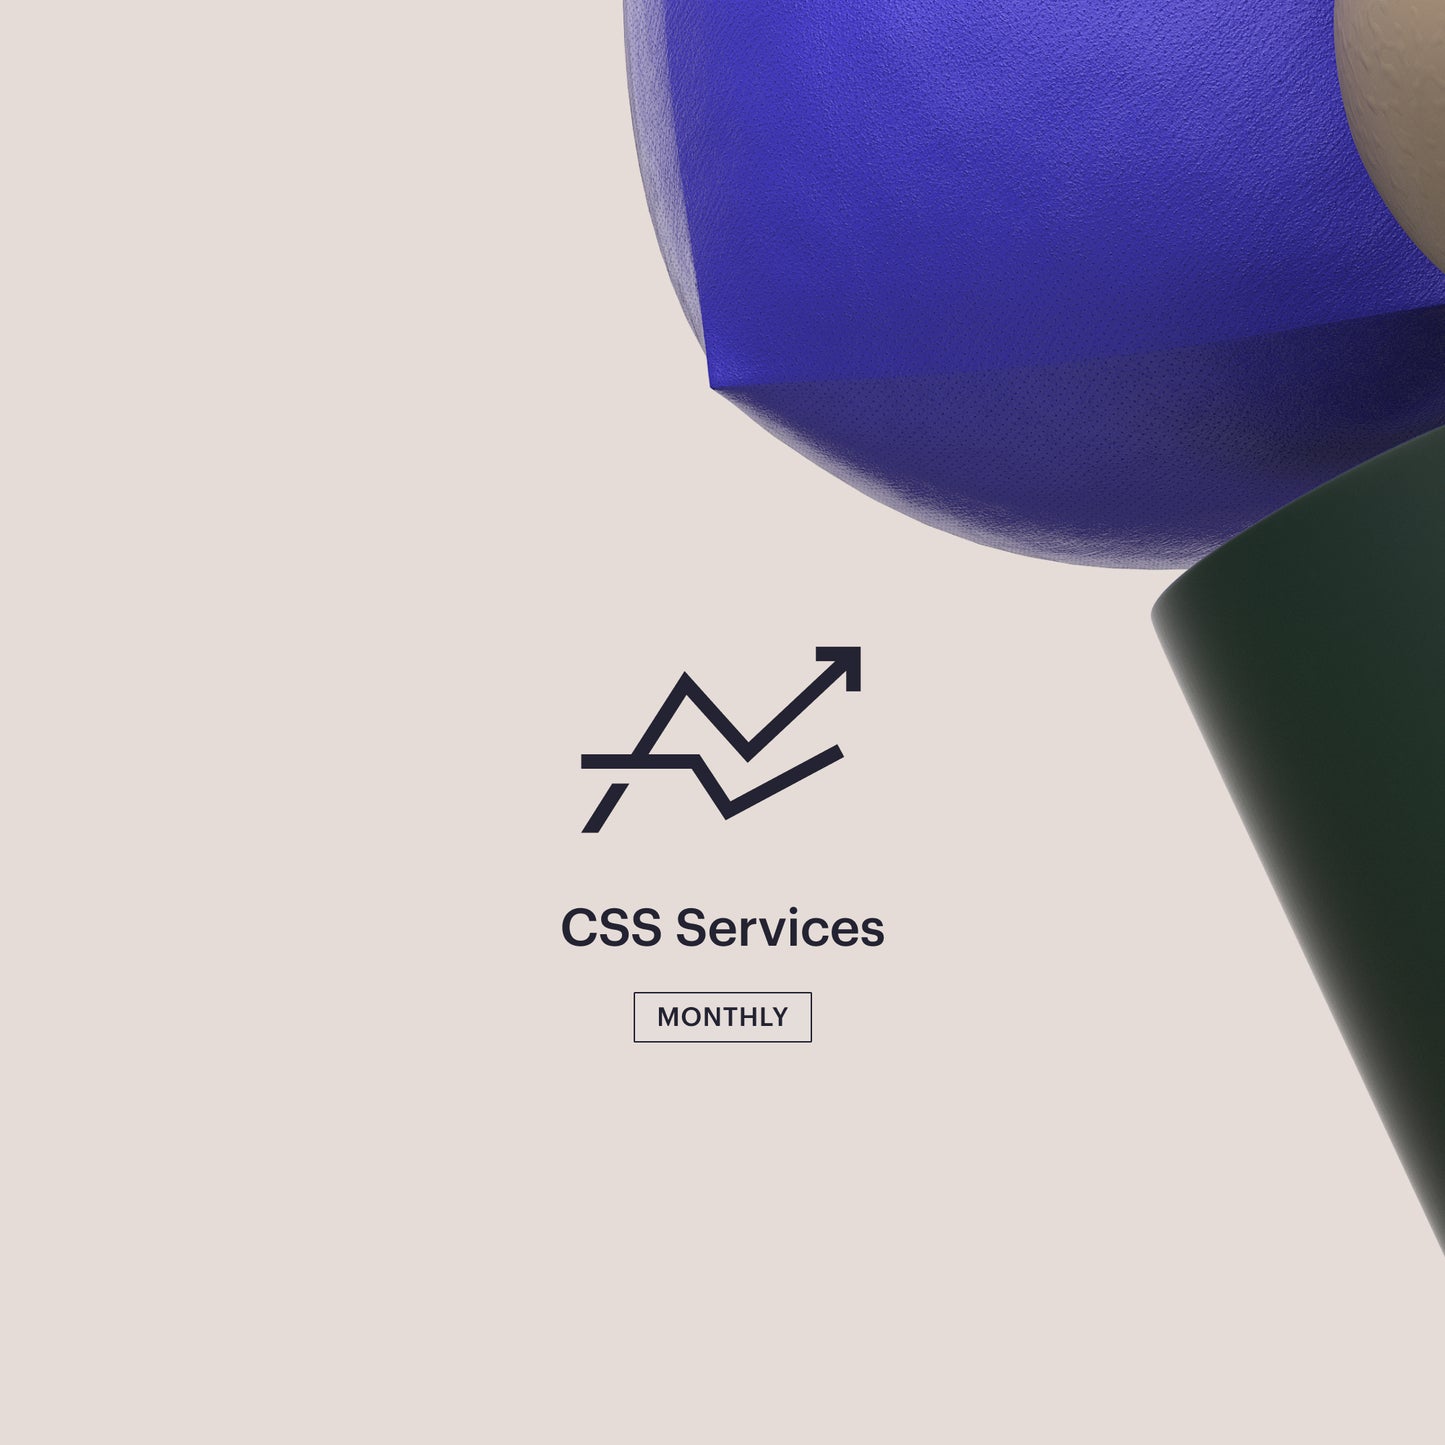 CSS Services Monthly